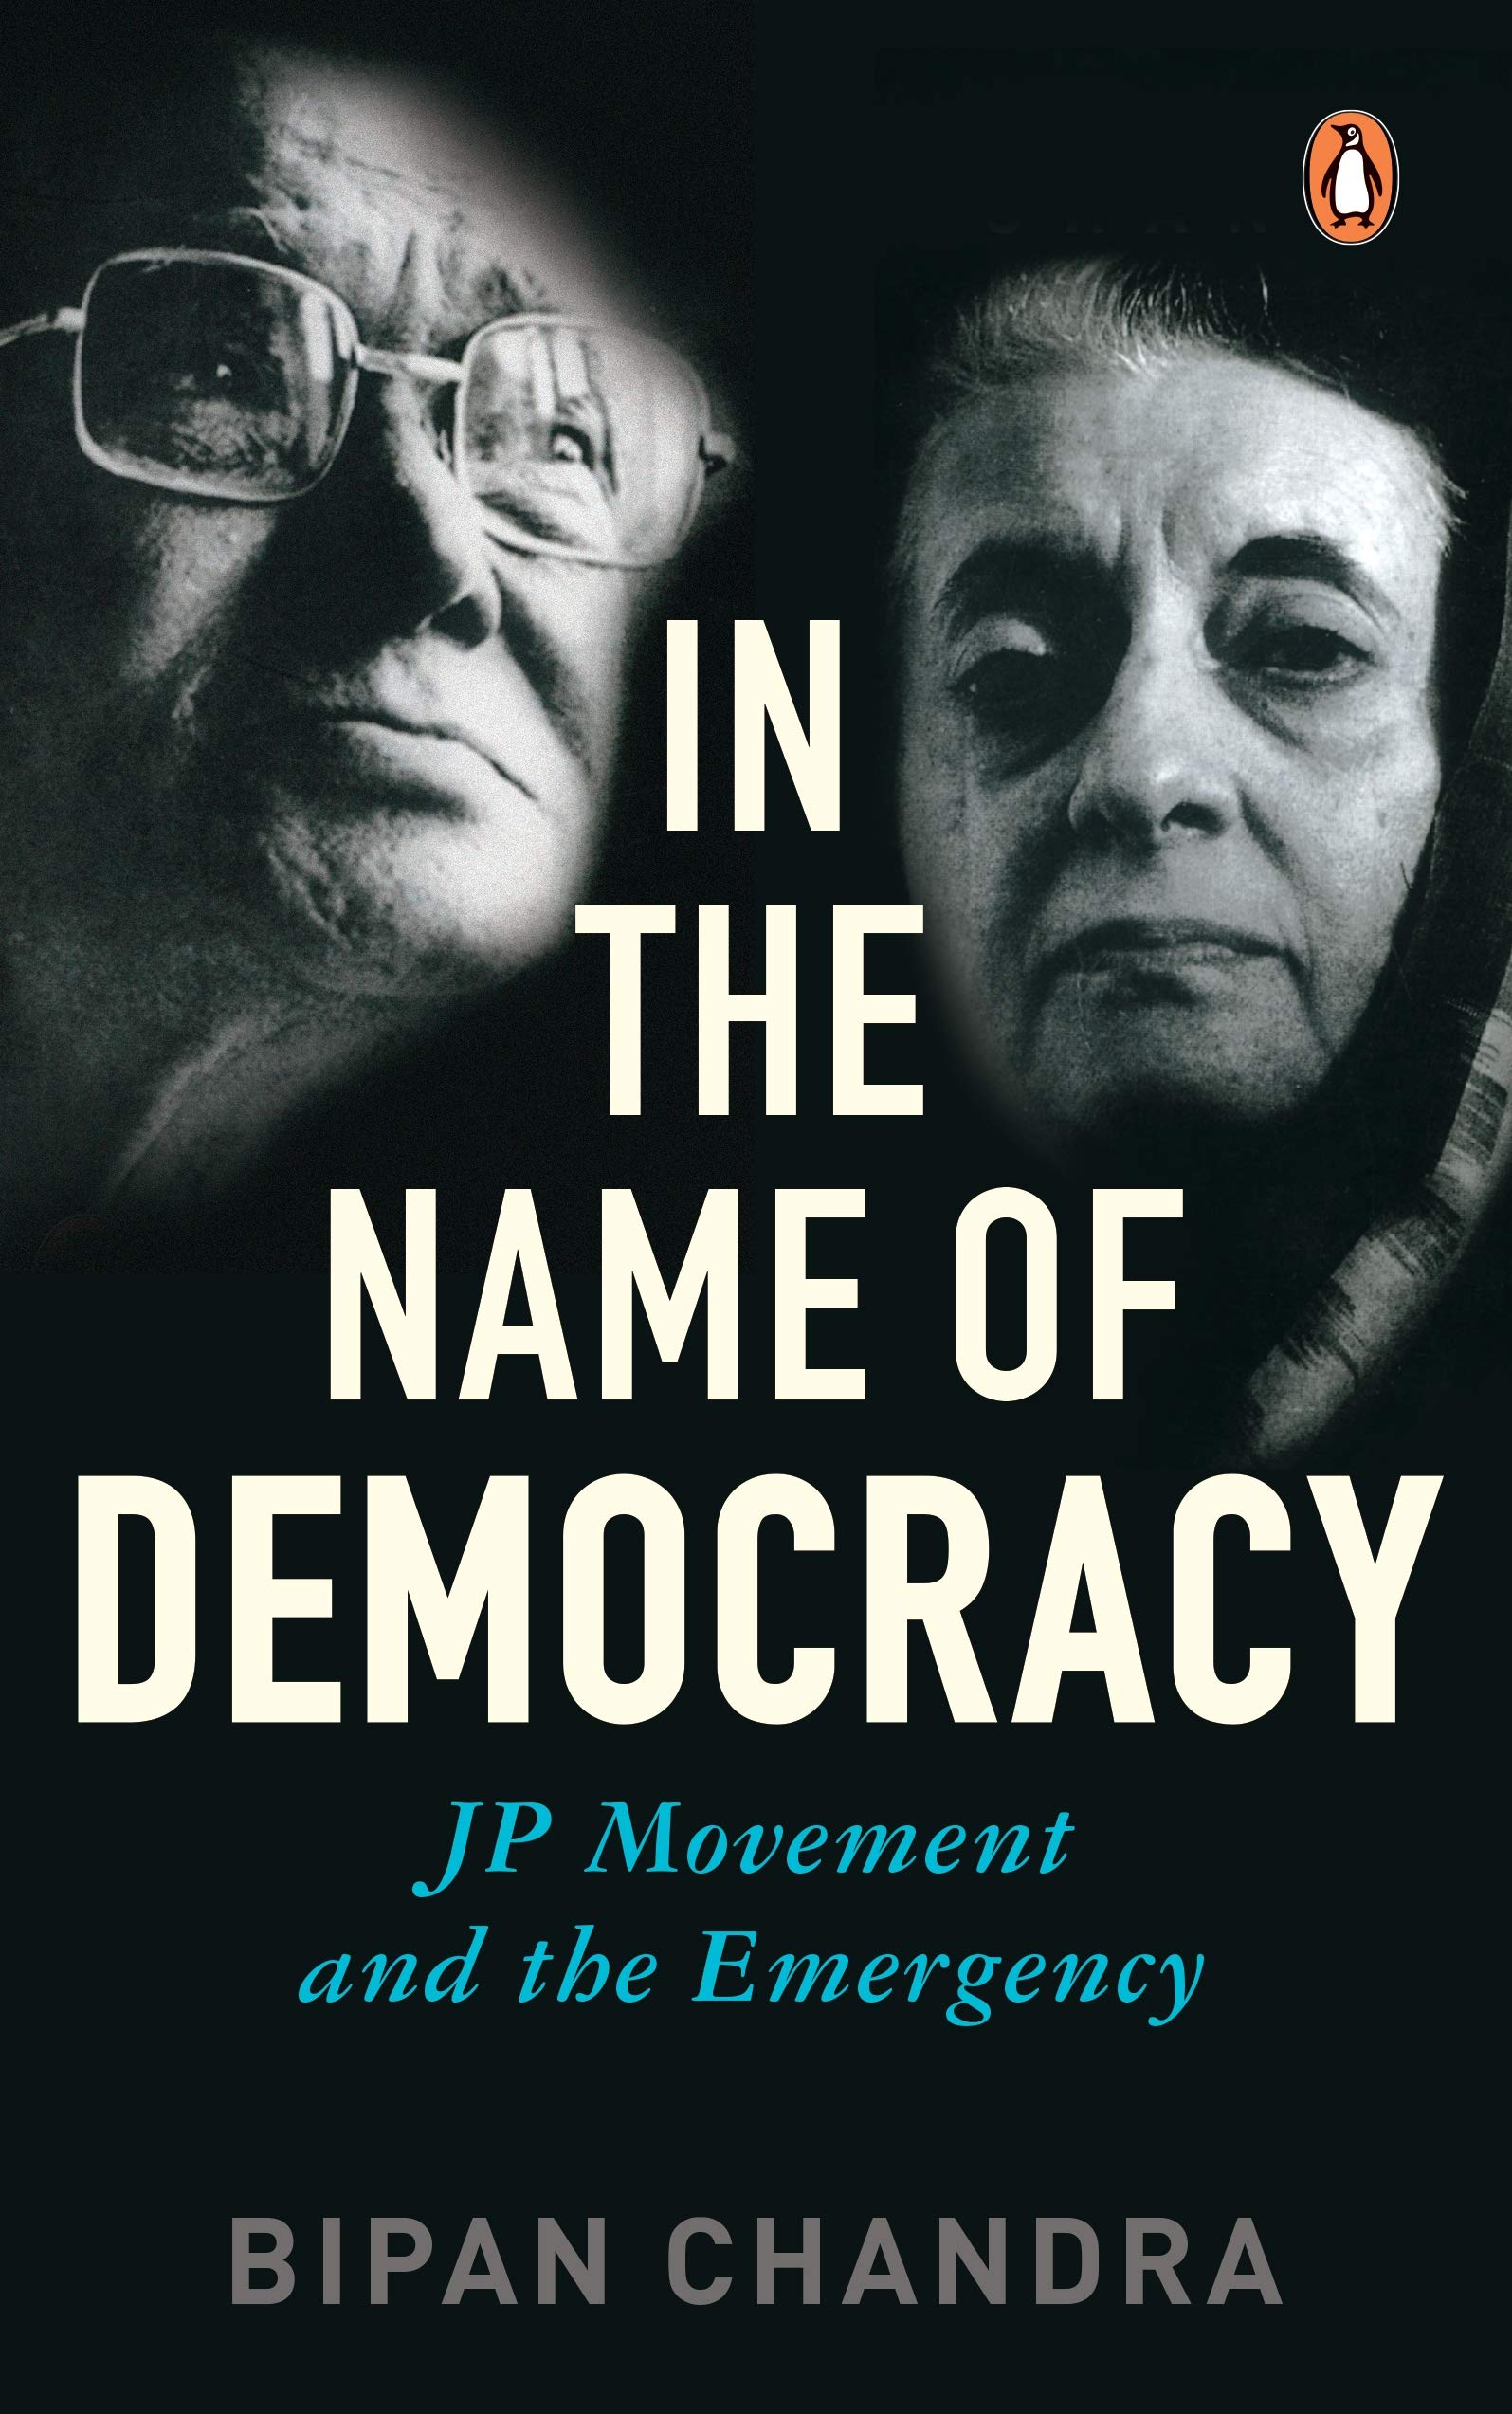 In the Name of Democracy: JP Movement and the Emergency